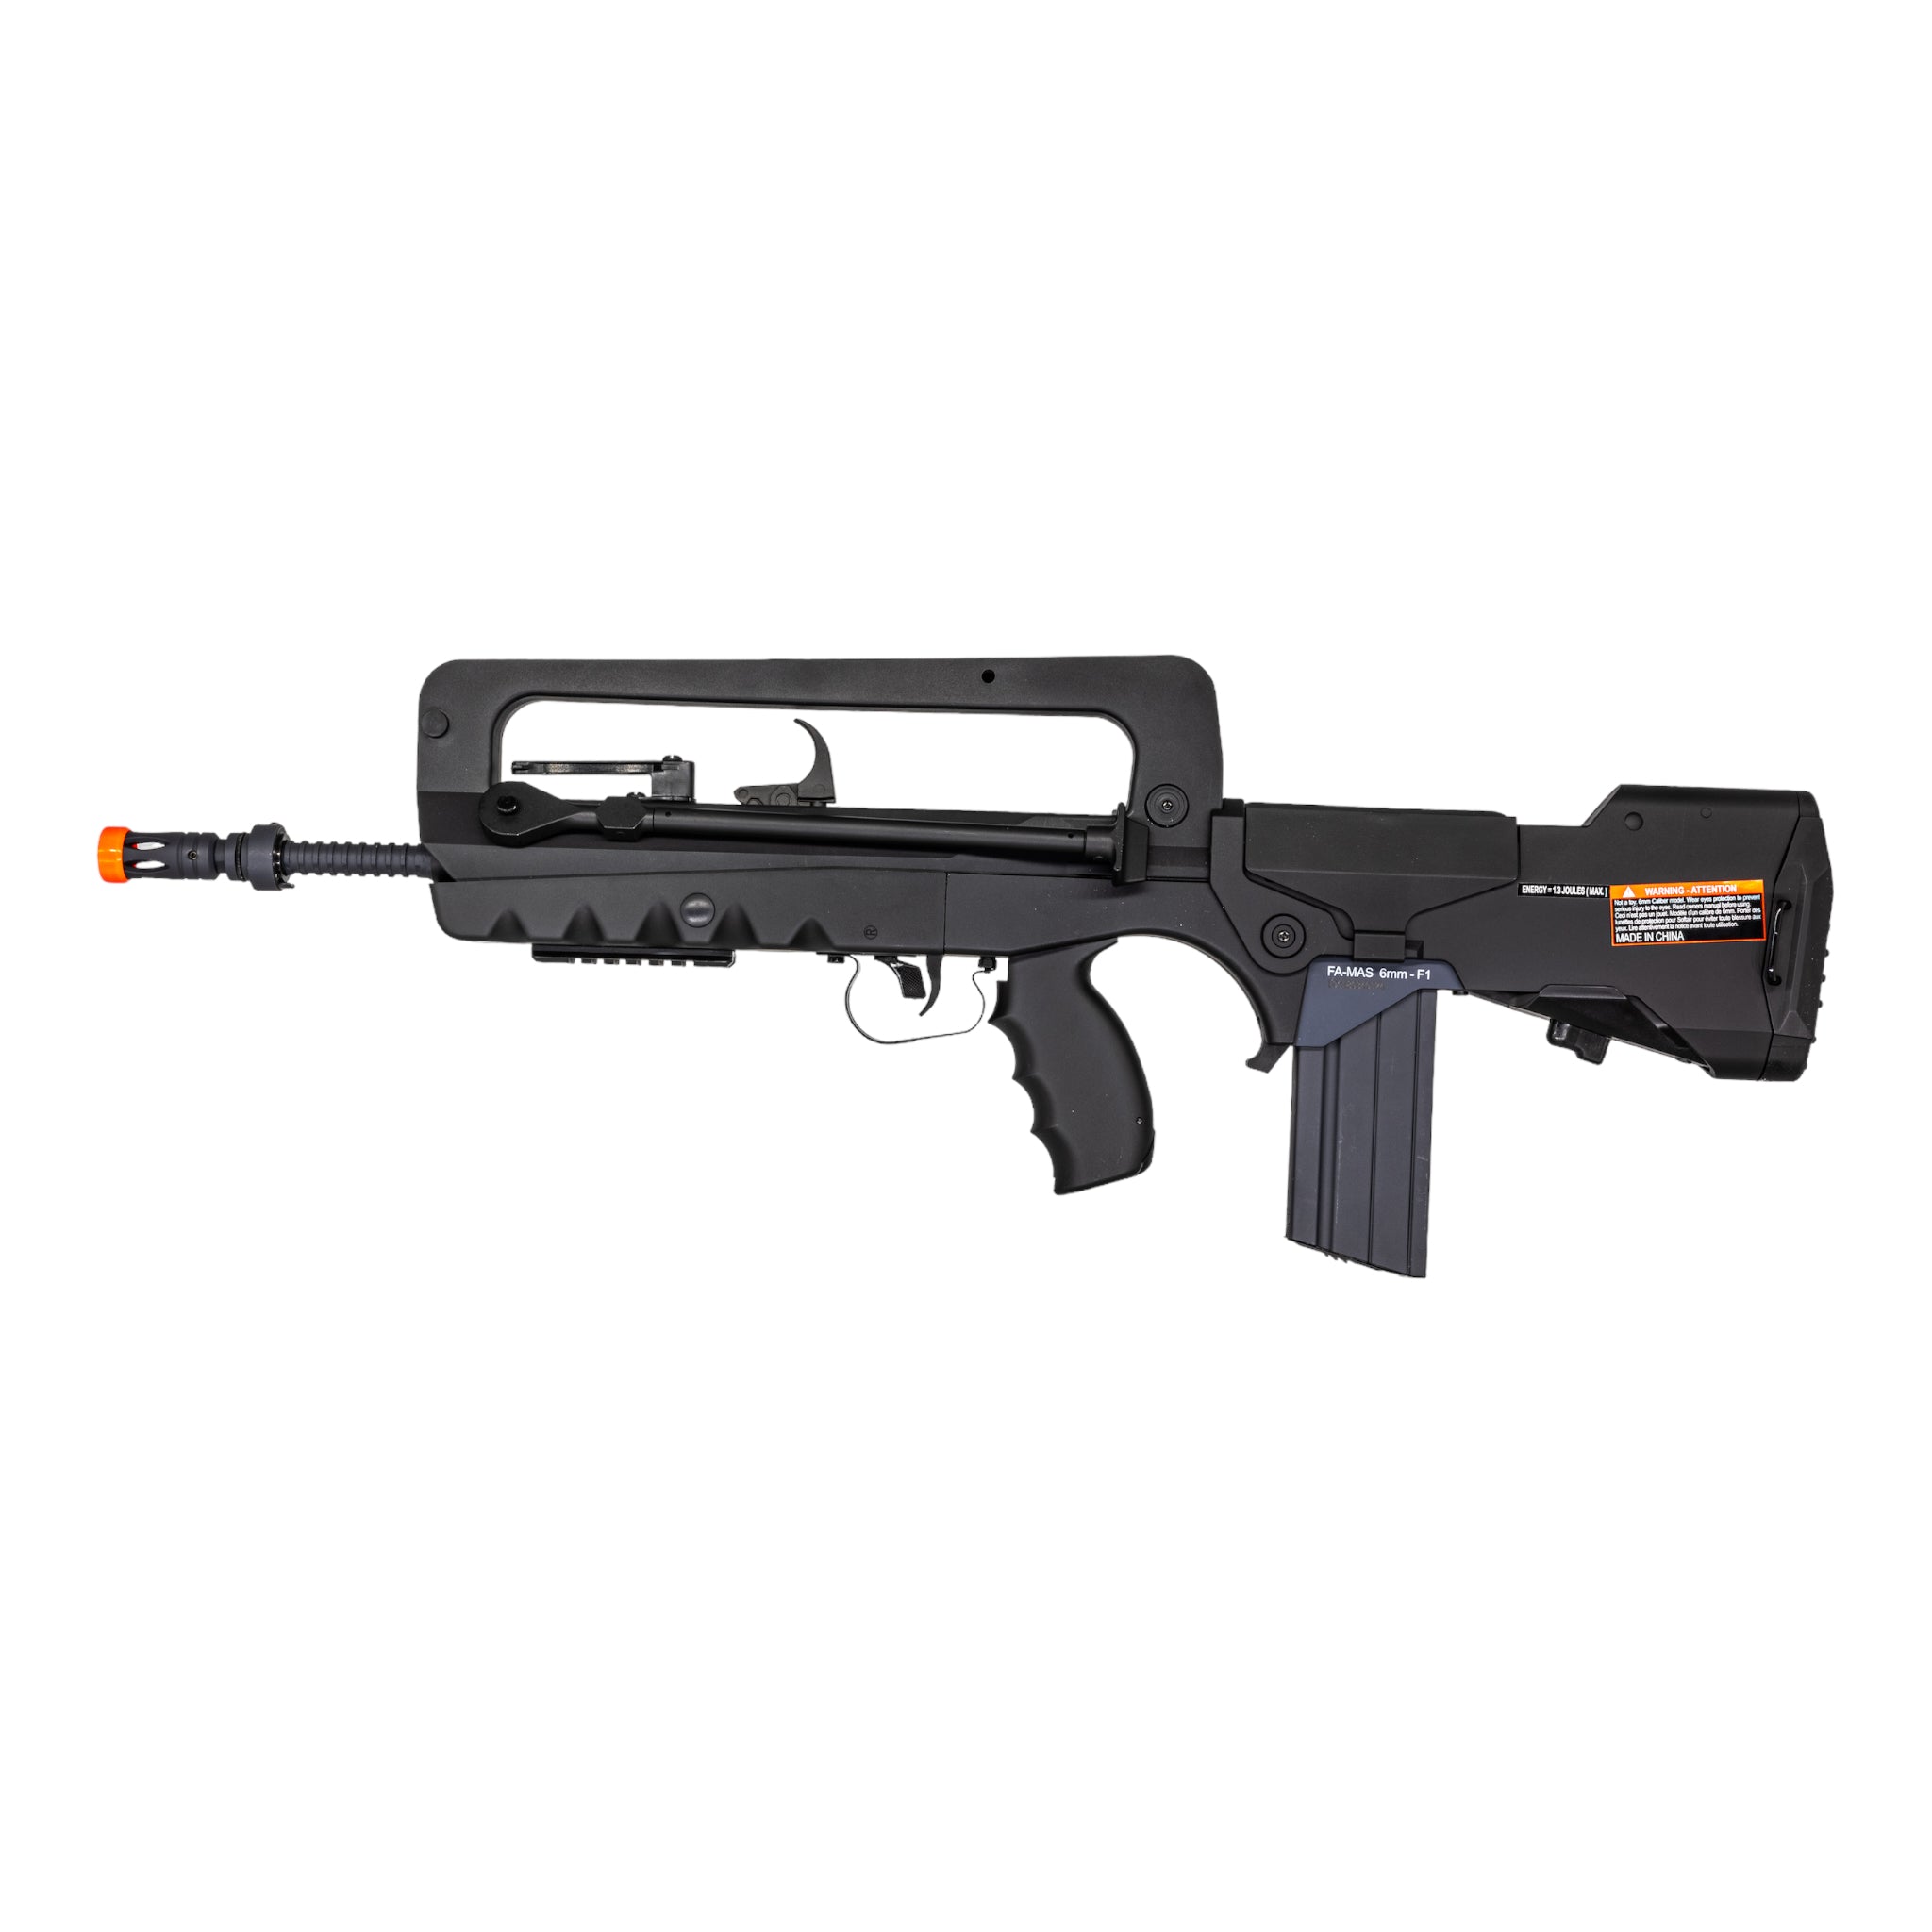 Mystery Box Airsoft Rifle Edition - ssairsoft.com